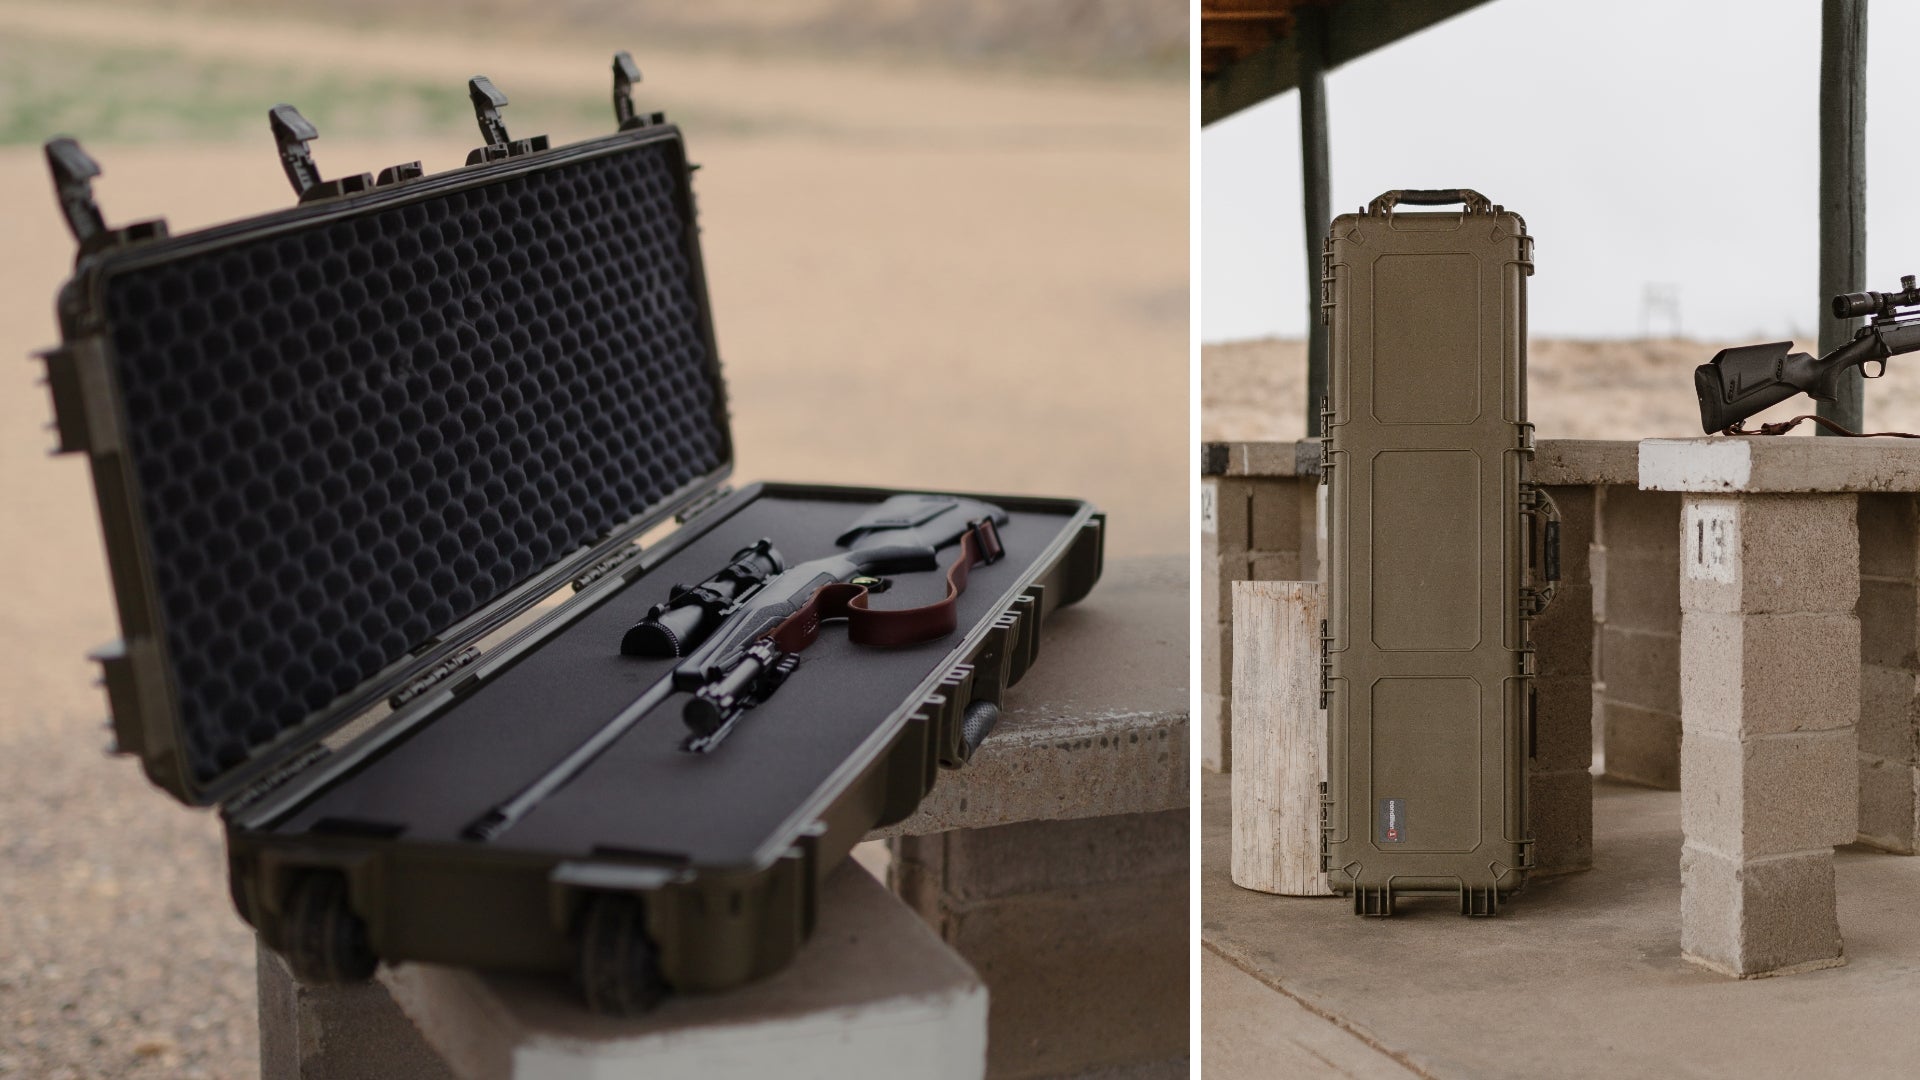 The Ultimate Protection: Benefits of Owning a Secure Heavy-Duty Protective Hard Rifle Case